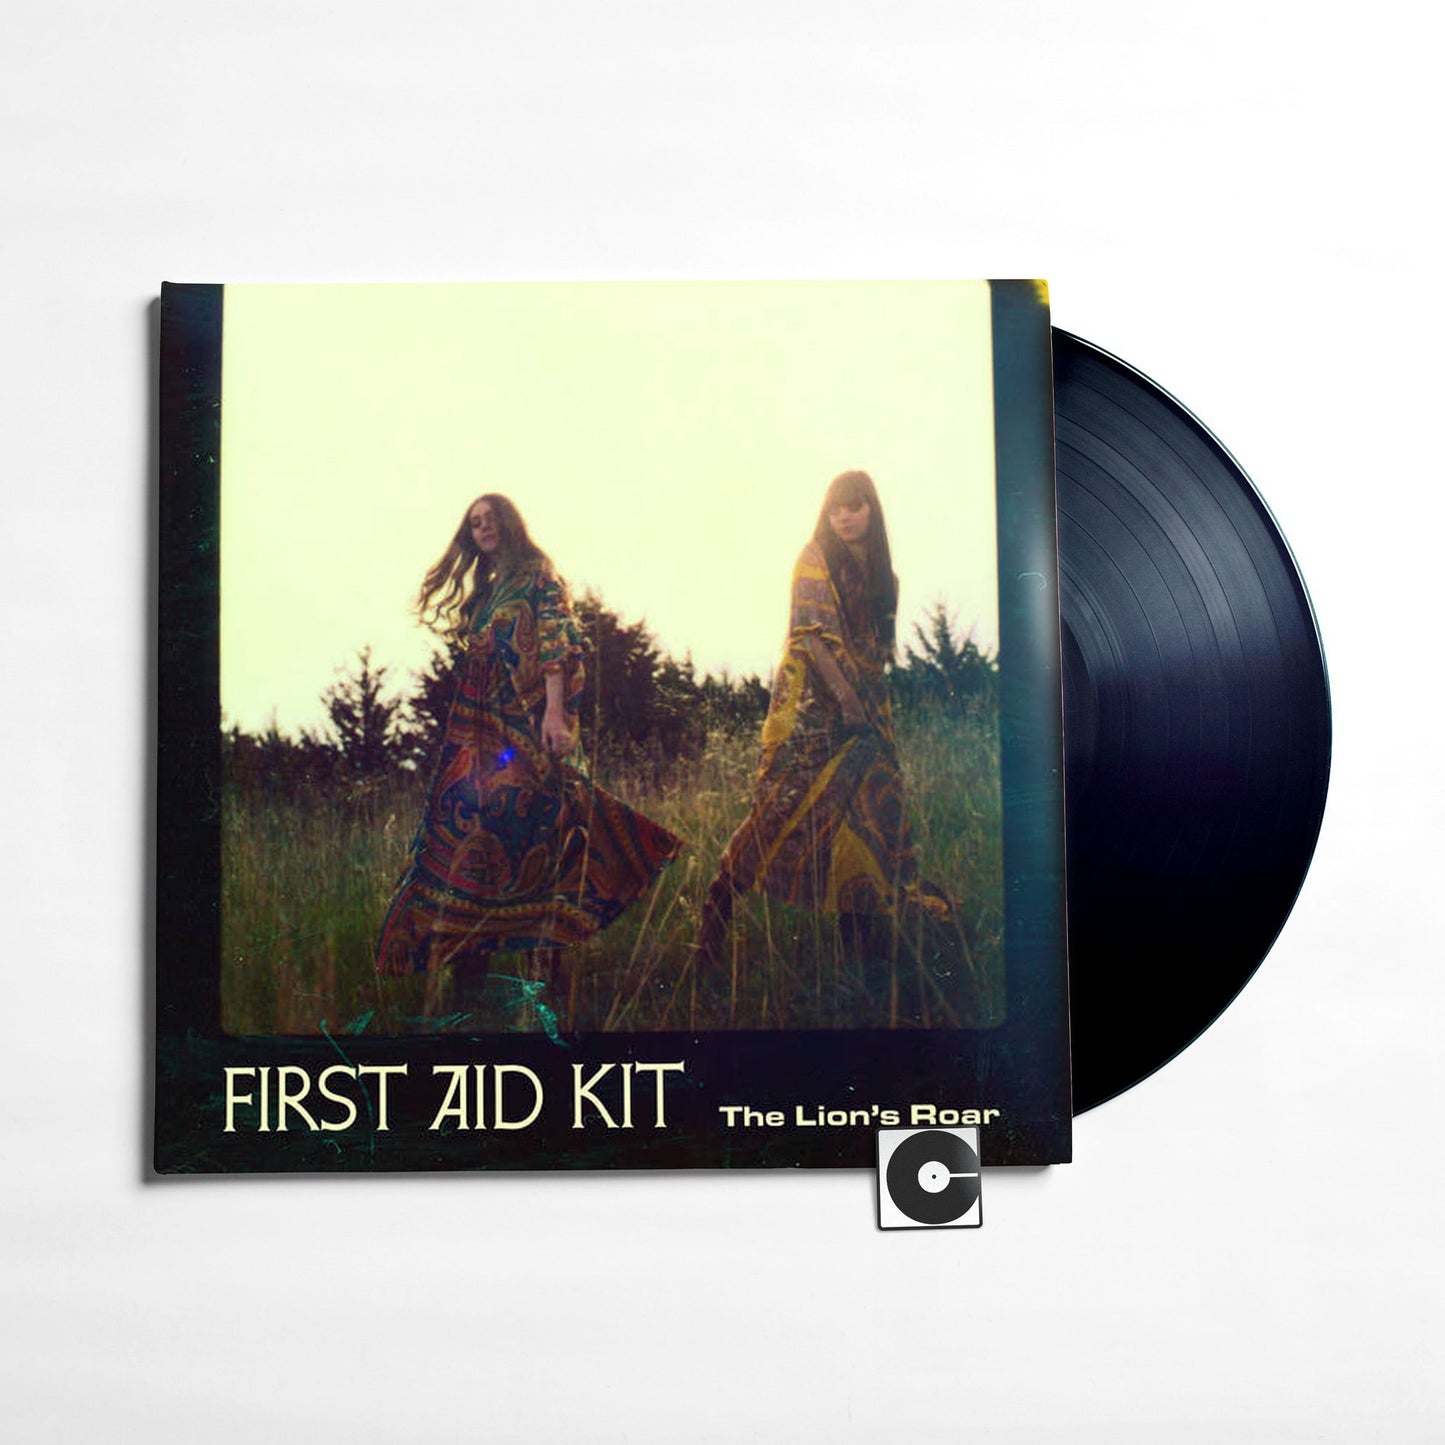 First Aid Kit - "The Lion's Roar"